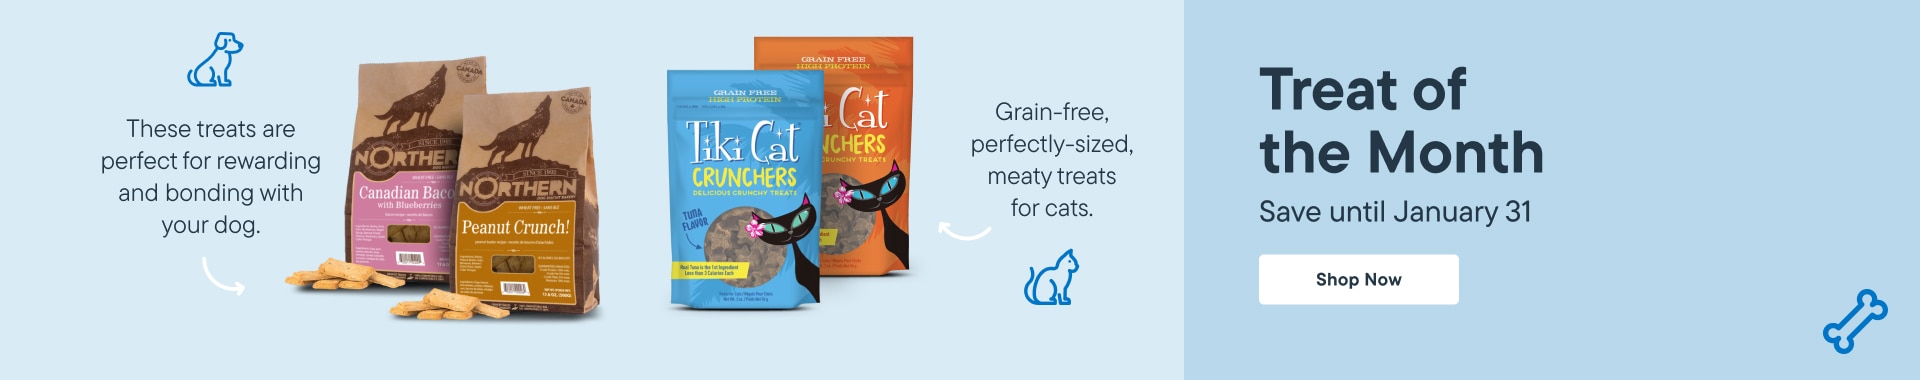 Shop JanuaryTreat of the Month for dogs and cats